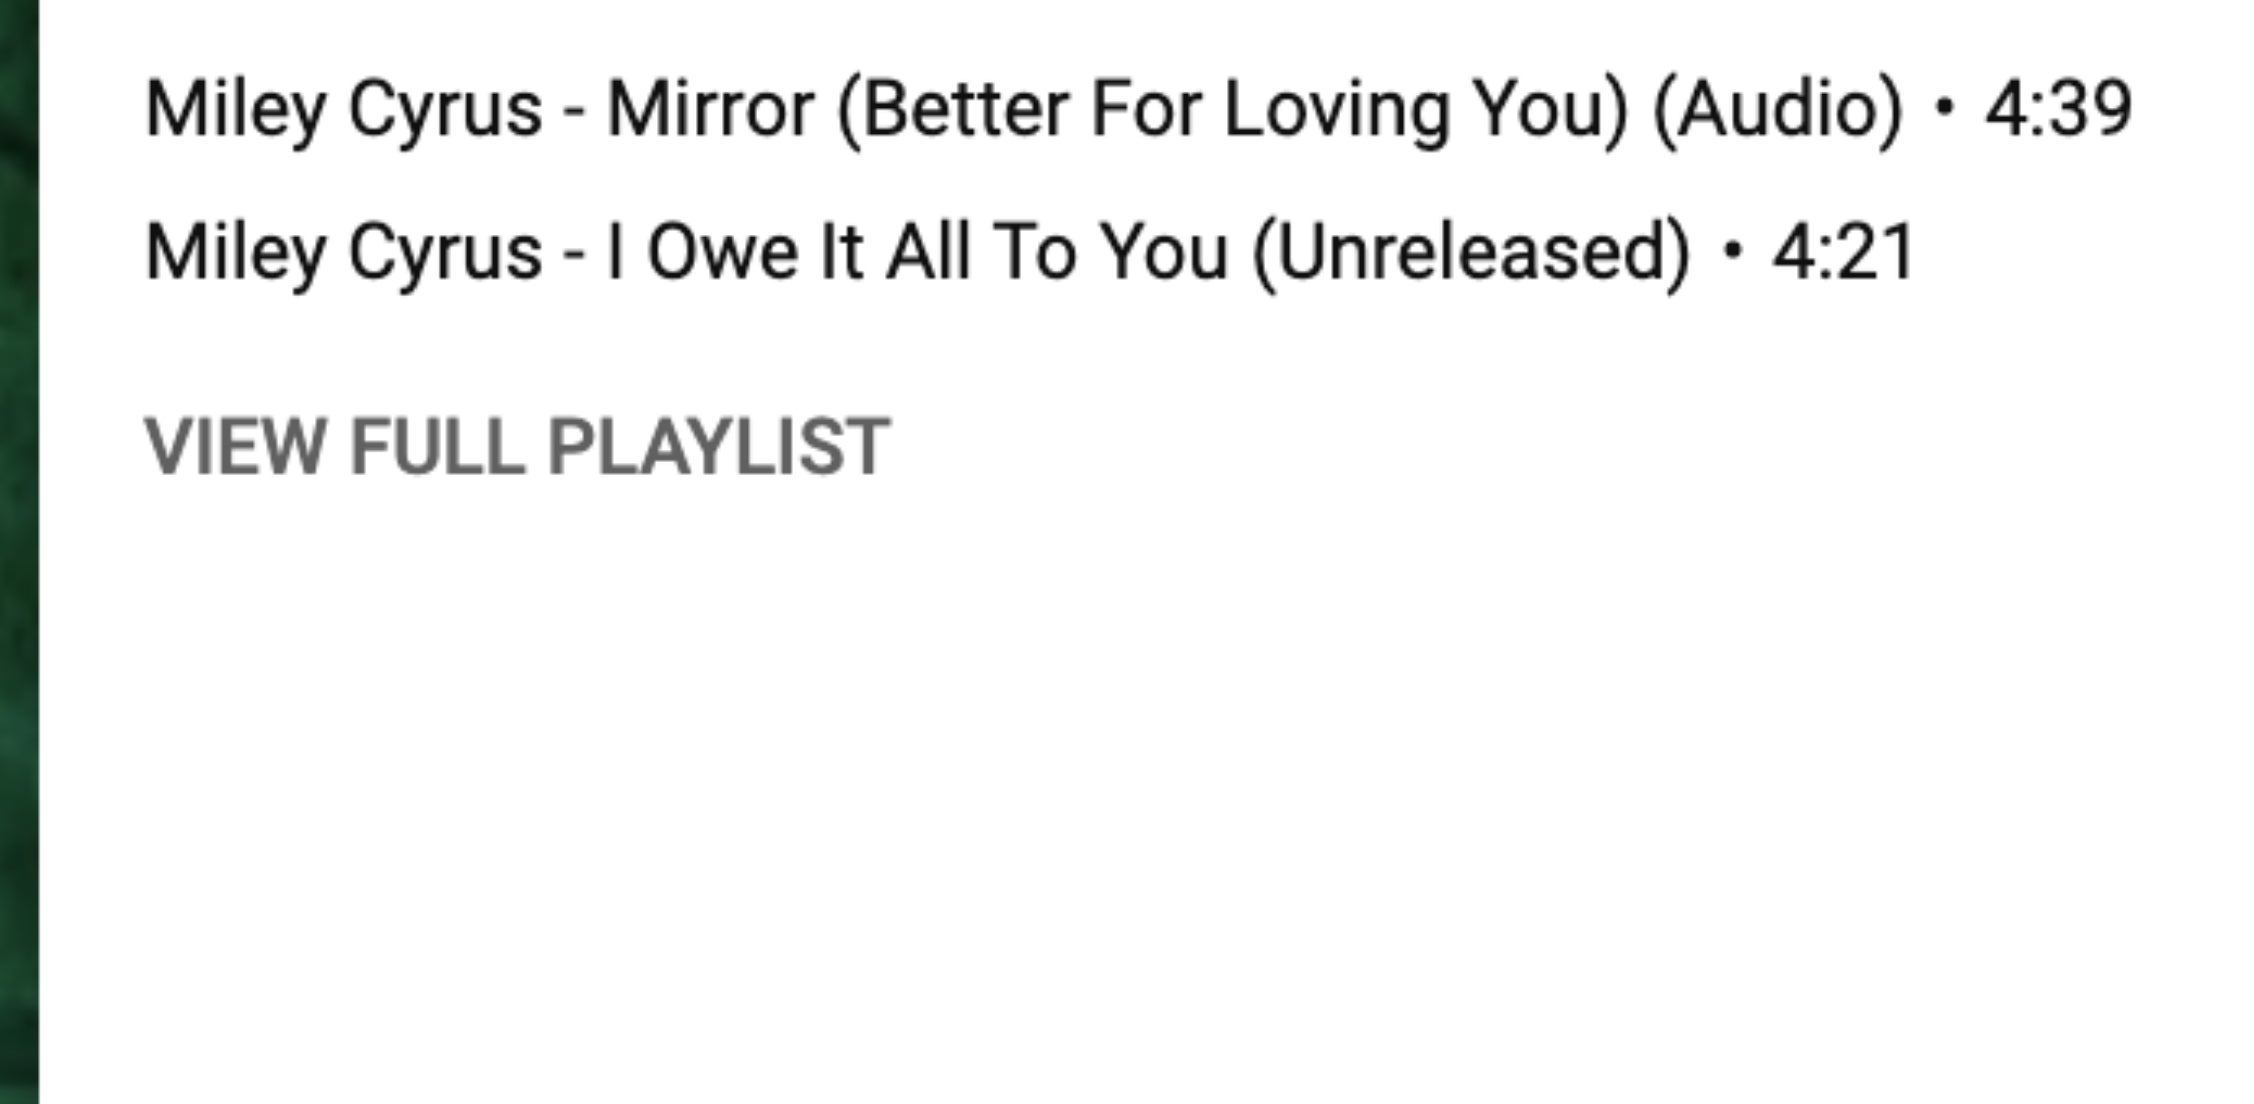 Text: All Miley Cyrus Unreleased songs. Vyltia Kuromi. Playlist. Miley Cyrus - Mirror (Better For Loving You) (Audio) - 4:39. Miley Cyrus - I Owe It All To You (Unreleased) - 4:21. View Full Playlist